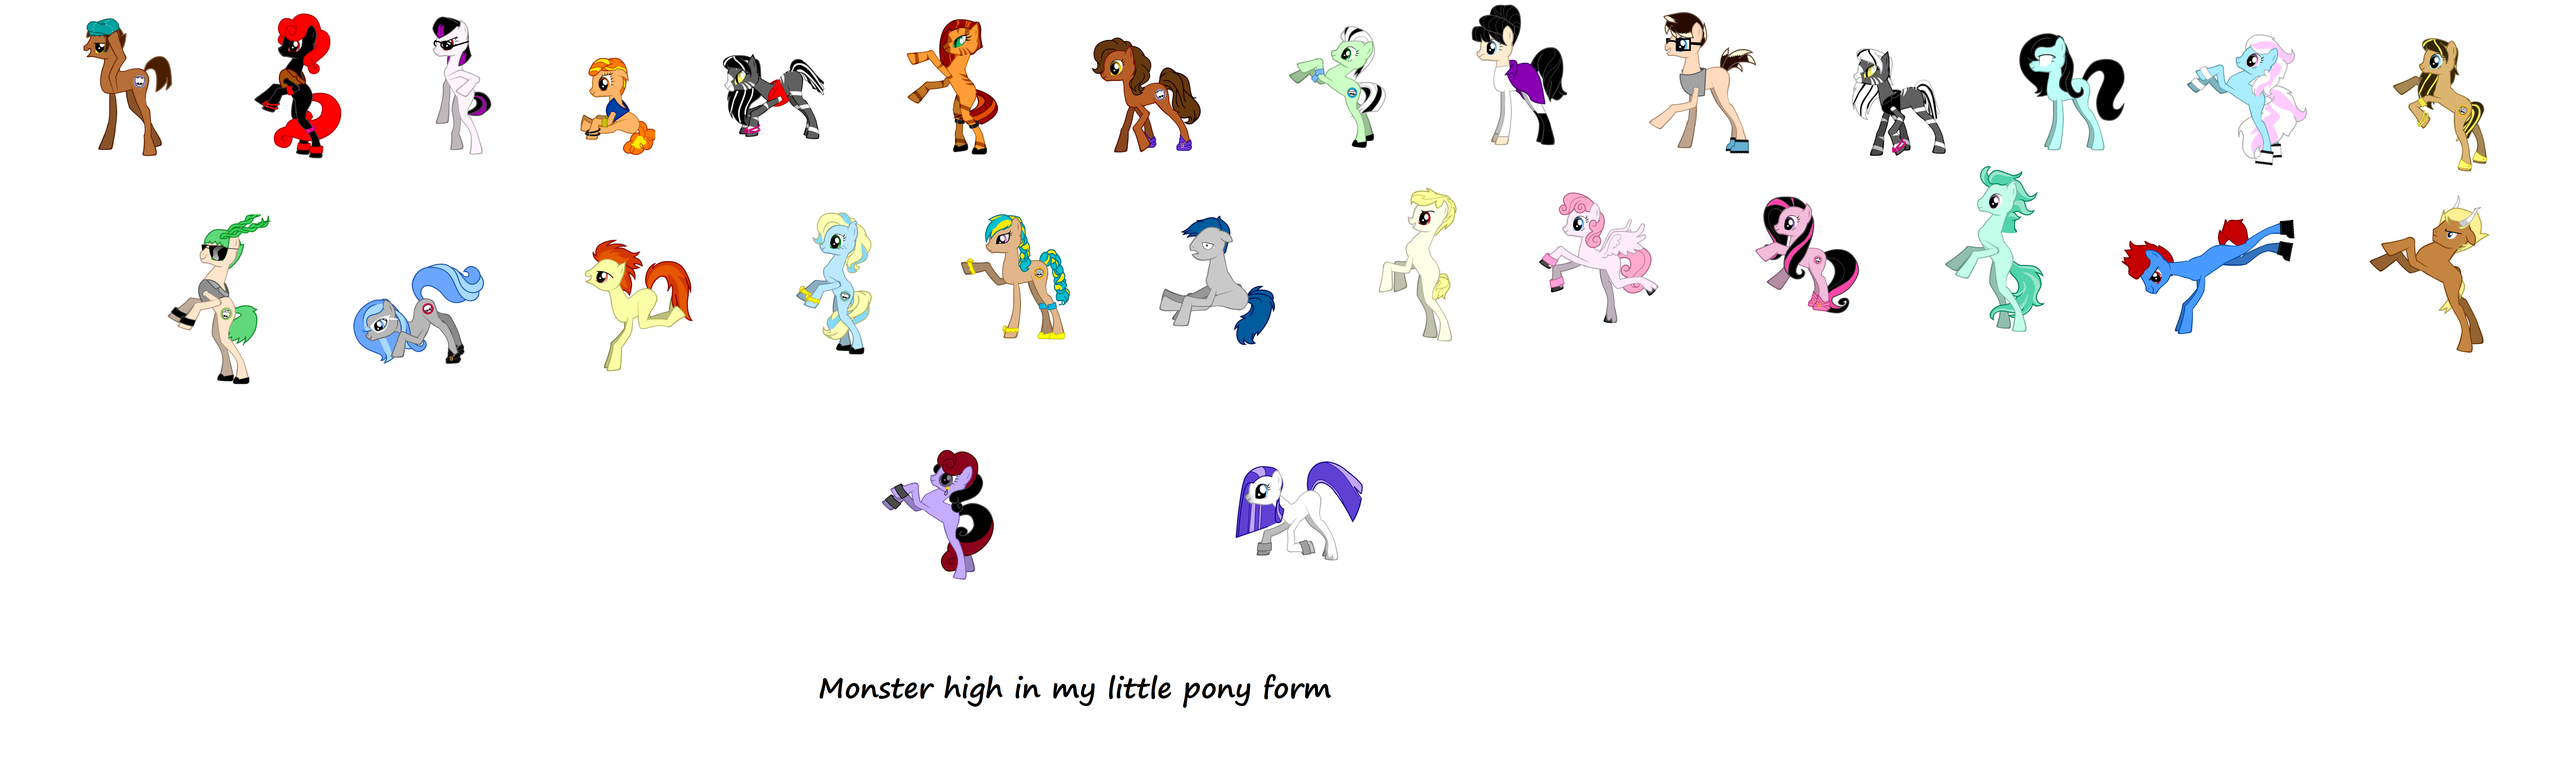 best of High little pony Monster and my